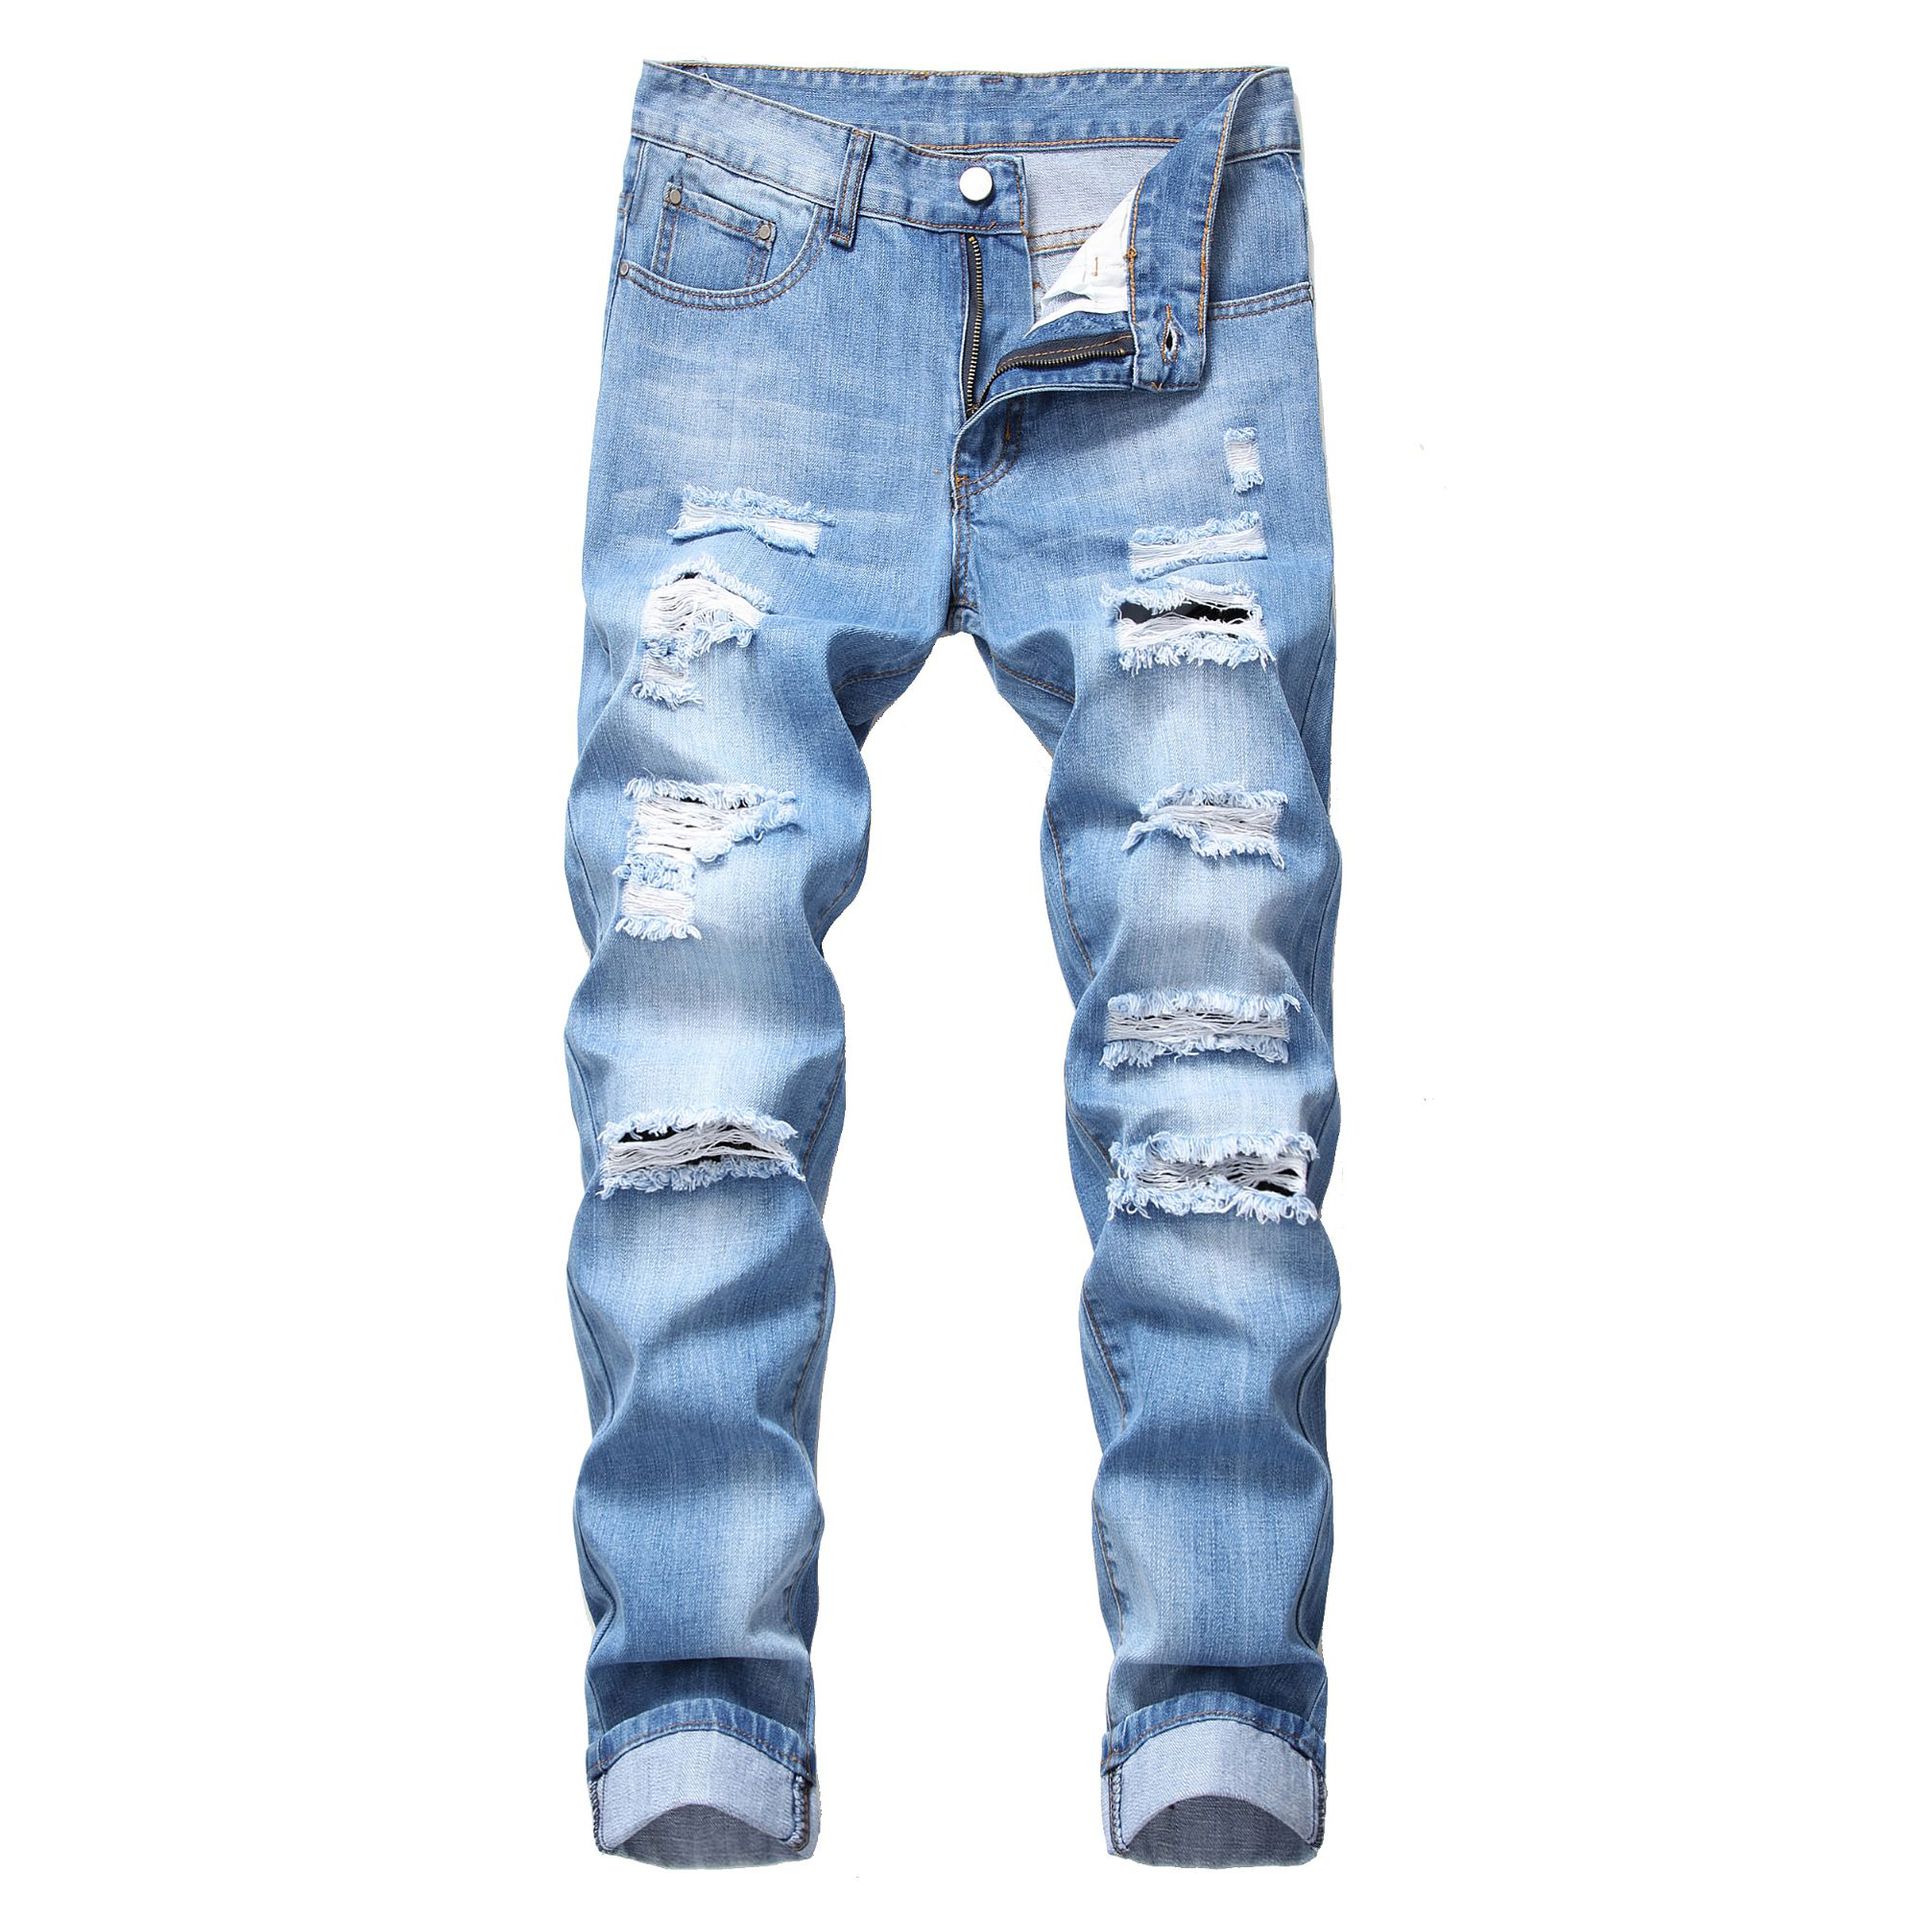 Mens Jeans Knee Hole Ripped Stretch Skinny Denim Pants Solid Color Black Blue Autumn Summer Hip-Hop Style Slim Fit Trousers S-4XL